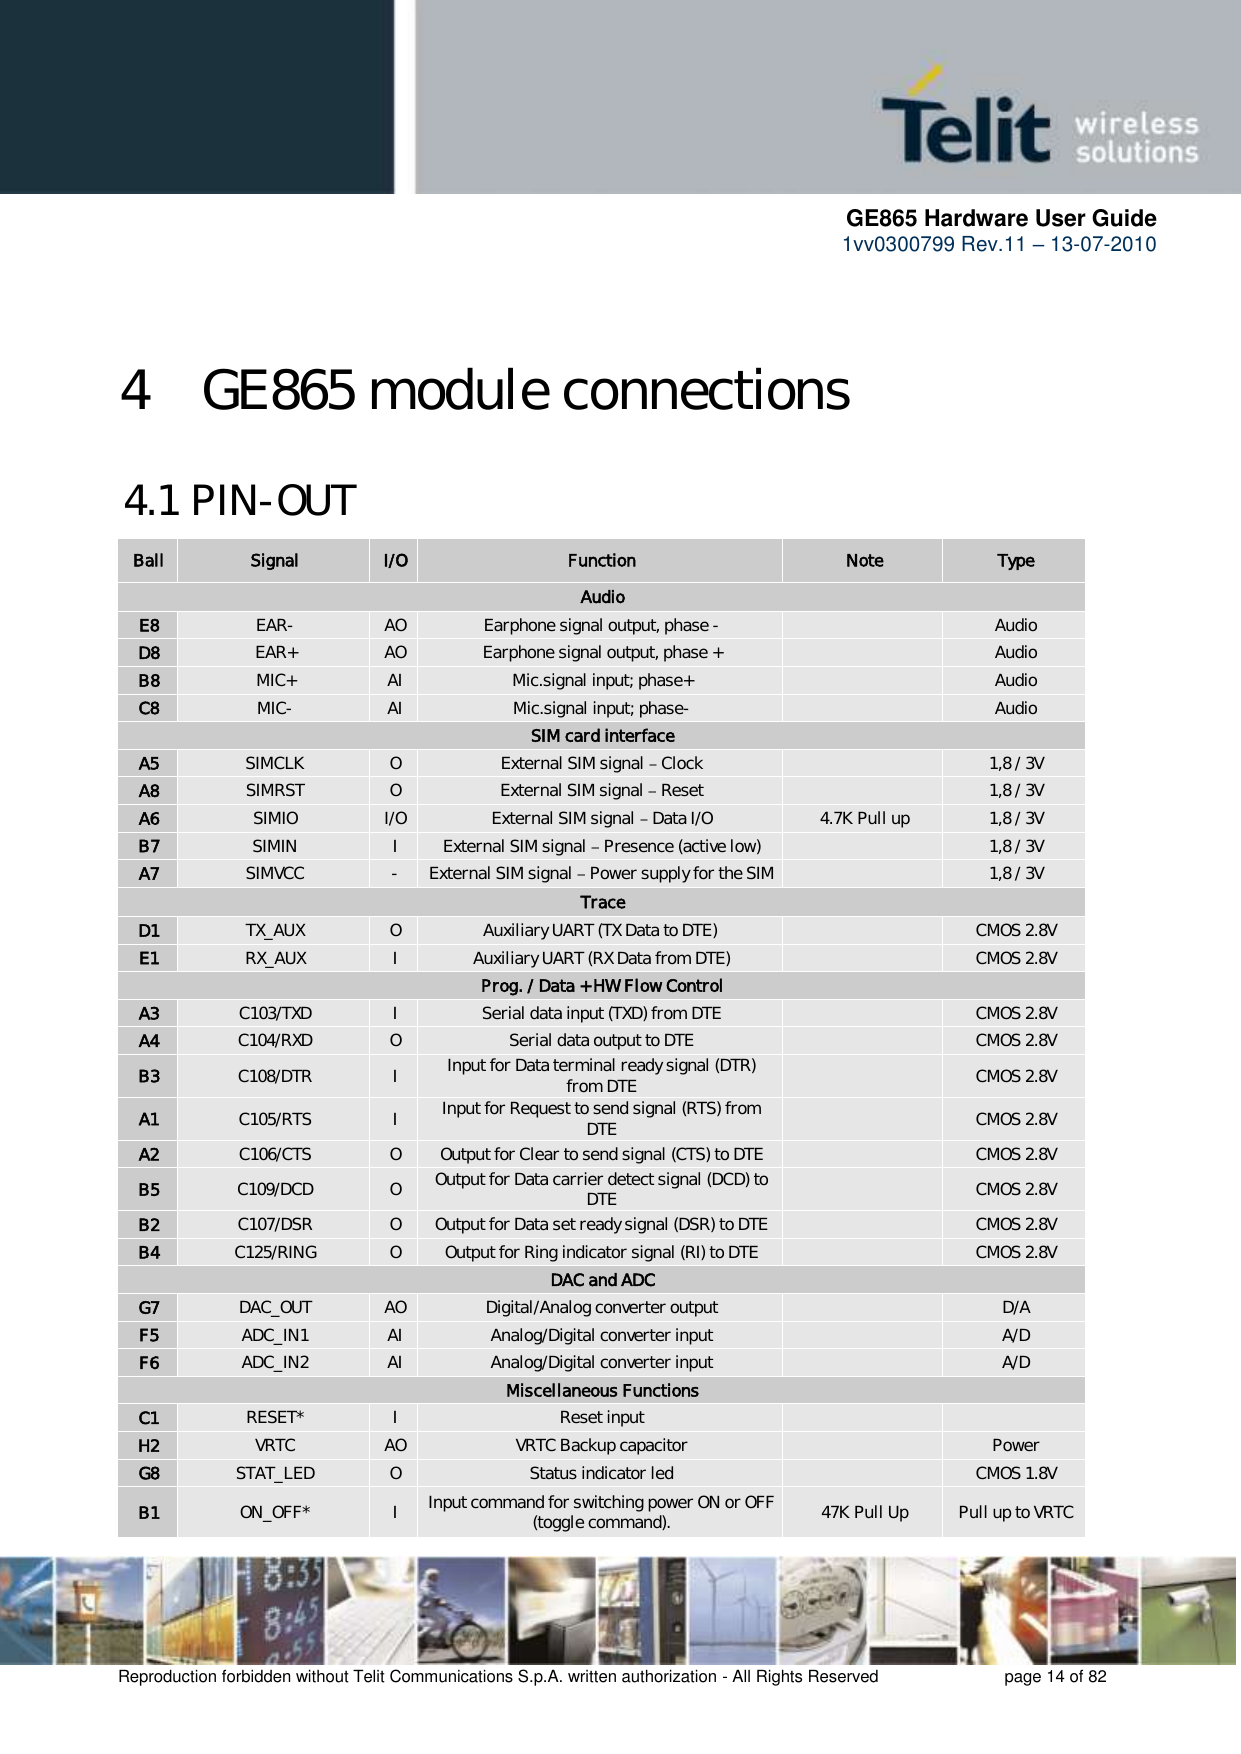      GE865 Hardware User Guide 1vv0300799 Rev.11 – 13-07-2010       Reproduction forbidden without Telit Communications S.p.A. written authorization - All Rights Reserved    page 14 of 82  4 GE865 module connections  4.1 PIN-OUT Ball Signal I/O Function Note Type Audio E8 EAR- AO Earphone signal output, phase -  Audio D8 EAR+ AO Earphone signal output, phase +  Audio B8 MIC+ AI Mic.signal input; phase+  Audio C8 MIC- AI Mic.signal input; phase-  Audio SIM card interface A5 SIMCLK O External SIM signal   Clock  1,8 / 3V A8 SIMRST O External SIM signal   Reset  1,8 / 3V A6 SIMIO I/O External SIM signal   Data I/O 4.7K Pull up 1,8 / 3V B7 SIMIN I External SIM signal   Presence (active low)  1,8 / 3V A7 SIMVCC - External SIM signal   Power supply for the SIM  1,8 / 3V Trace D1 TX_AUX O Auxiliary UART (TX Data to DTE)  CMOS 2.8V E1 RX_AUX I Auxiliary UART (RX Data from DTE)  CMOS 2.8V Prog. / Data + HW Flow Control A3 C103/TXD I Serial data input (TXD) from DTE  CMOS 2.8V A4 C104/RXD O Serial data output to DTE  CMOS 2.8V B3 C108/DTR I Input for Data terminal ready signal (DTR) from DTE  CMOS 2.8V A1 C105/RTS I Input for Request to send signal (RTS) from DTE  CMOS 2.8V A2 C106/CTS O Output for Clear to send signal (CTS) to DTE  CMOS 2.8V B5 C109/DCD O Output for Data carrier detect signal (DCD) to DTE  CMOS 2.8V B2 C107/DSR O Output for Data set ready signal (DSR) to DTE  CMOS 2.8V B4 C125/RING O Output for Ring indicator signal (RI) to DTE  CMOS 2.8V DAC and ADC G7 DAC_OUT AO Digital/Analog converter output  D/A F5 ADC_IN1 AI Analog/Digital converter input  A/D F6 ADC_IN2 AI Analog/Digital converter input  A/D Miscellaneous Functions C1 RESET* I Reset input   H2 VRTC AO VRTC Backup capacitor  Power G8 STAT_LED O Status indicator led  CMOS 1.8V B1 ON_OFF* I Input command for switching power ON or OFF (toggle command). 47K Pull Up Pull up to VRTC 